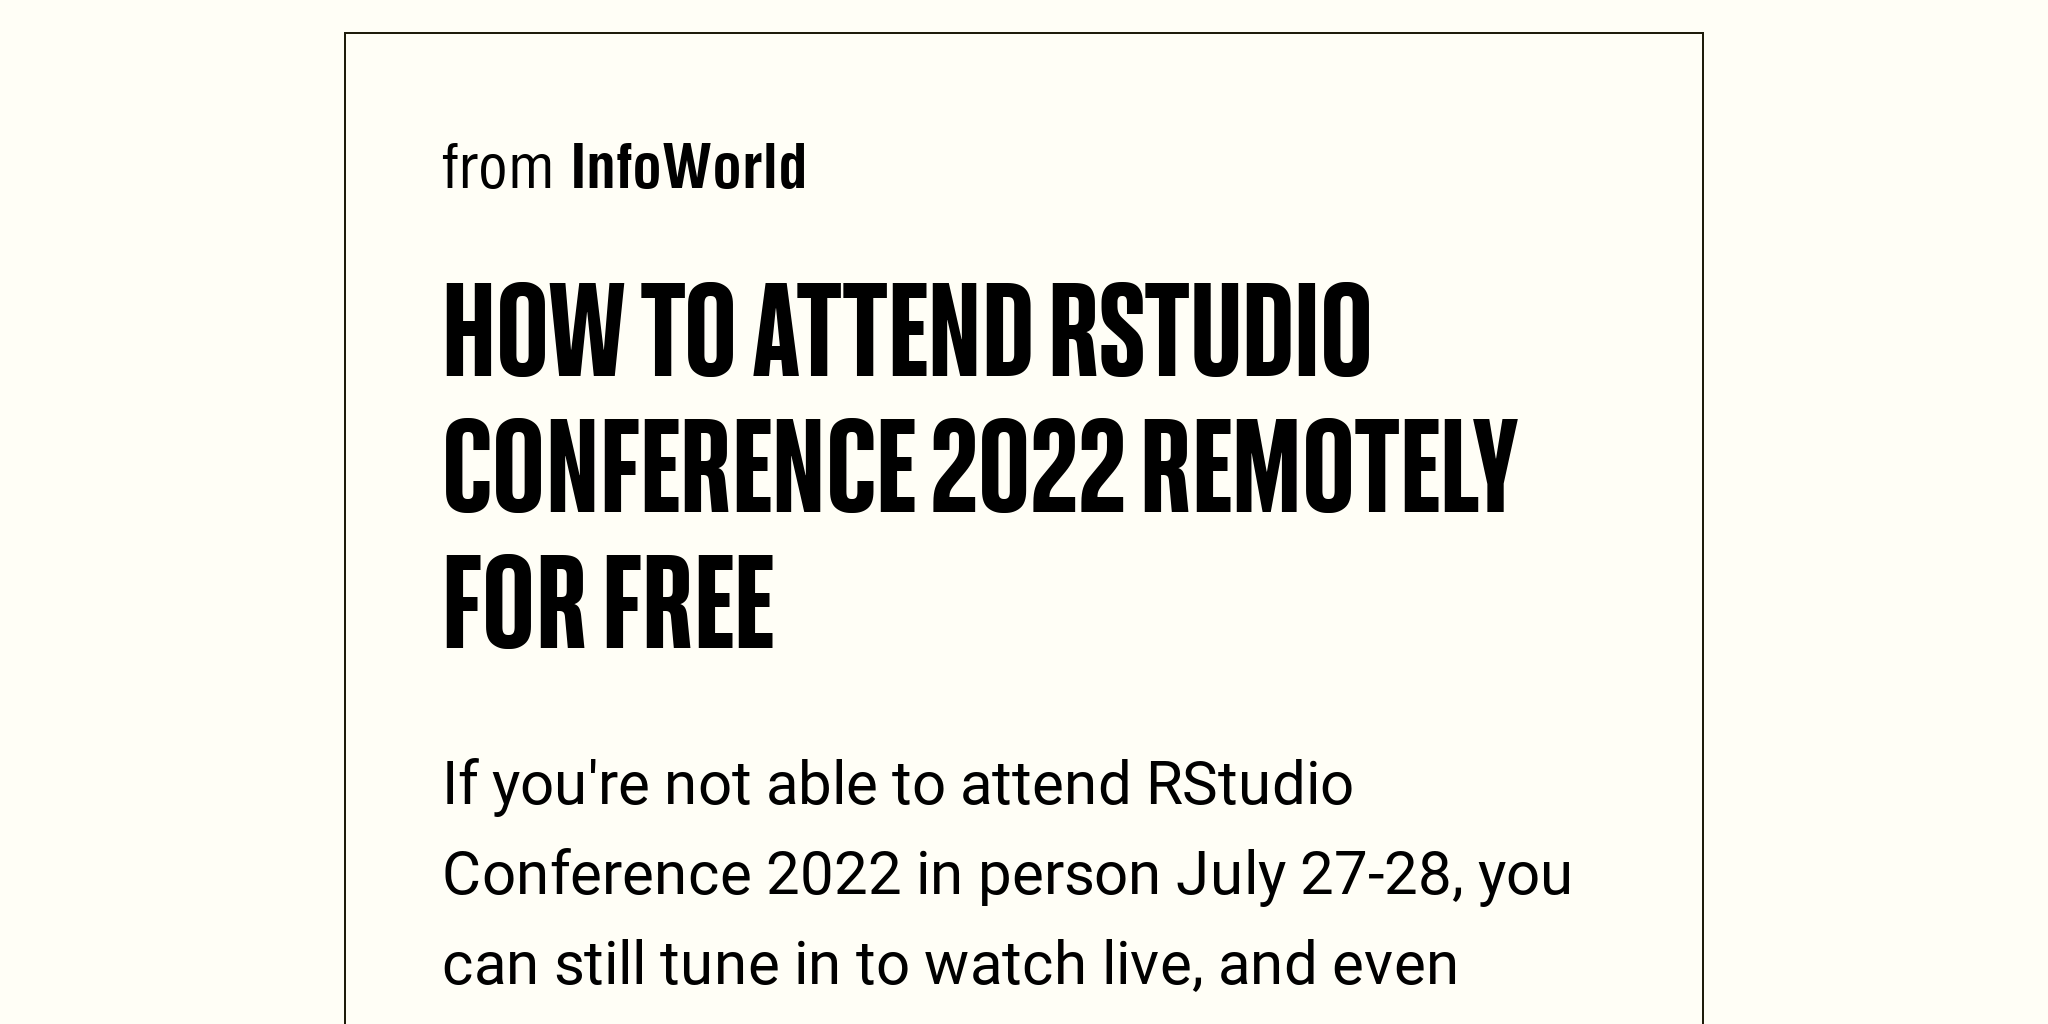 How to attend RStudio Conference 2022 remotely for free Briefly